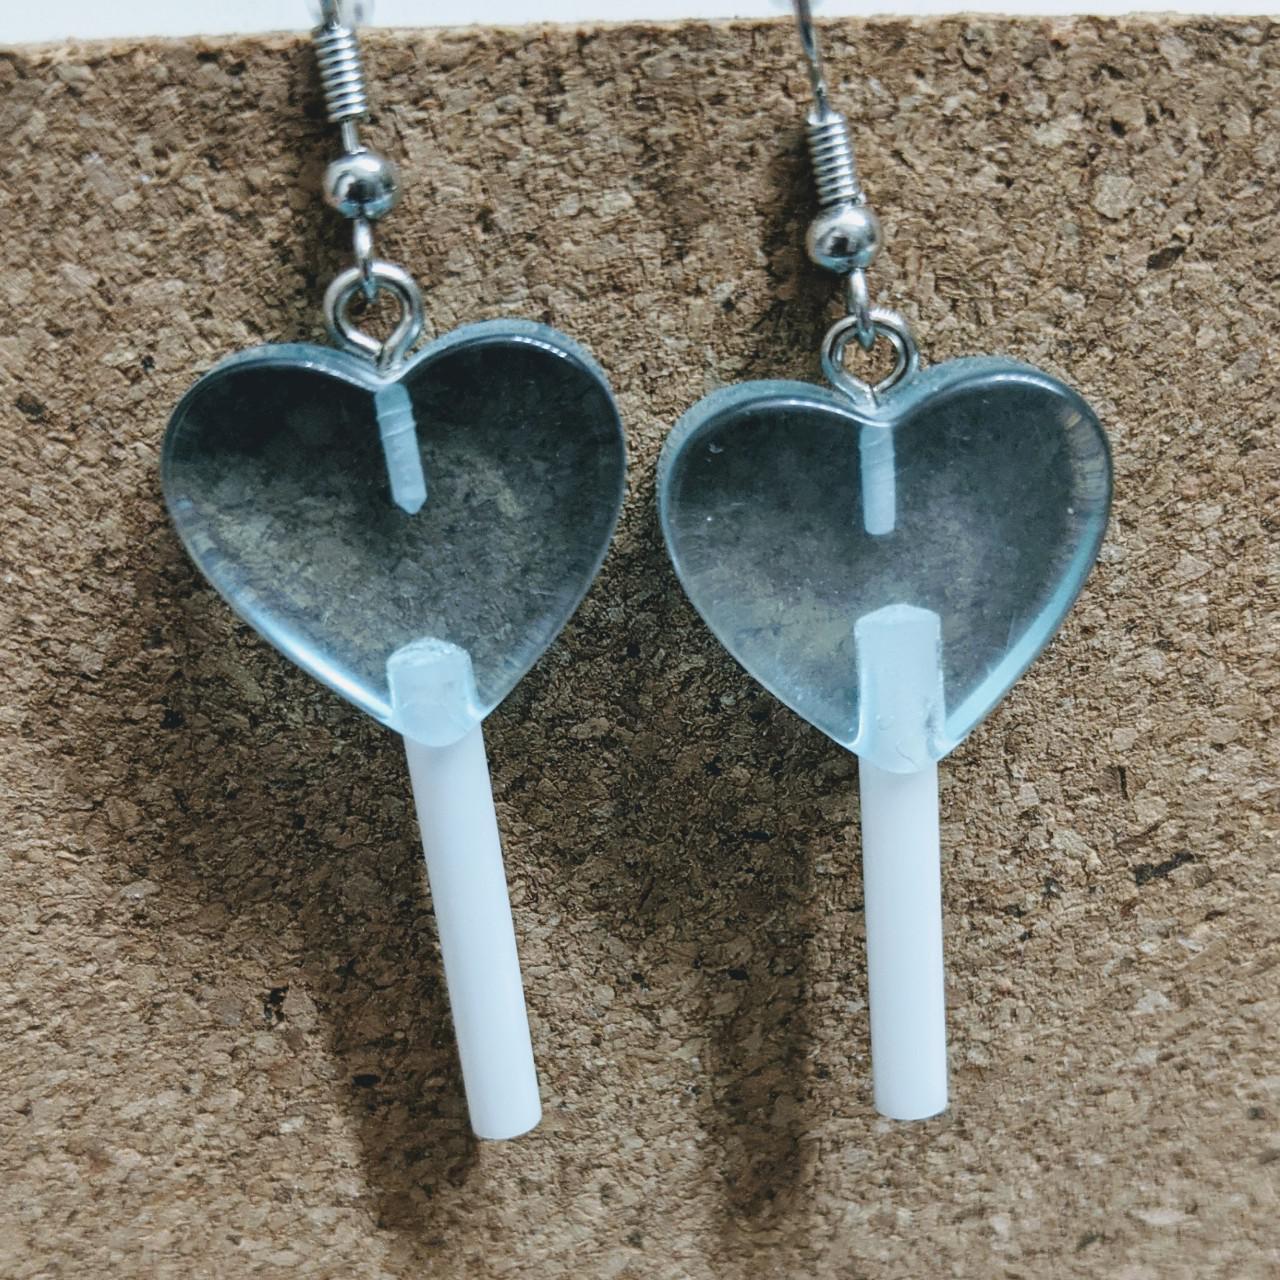 Product Image 2 - These cute heart lollypop earrings